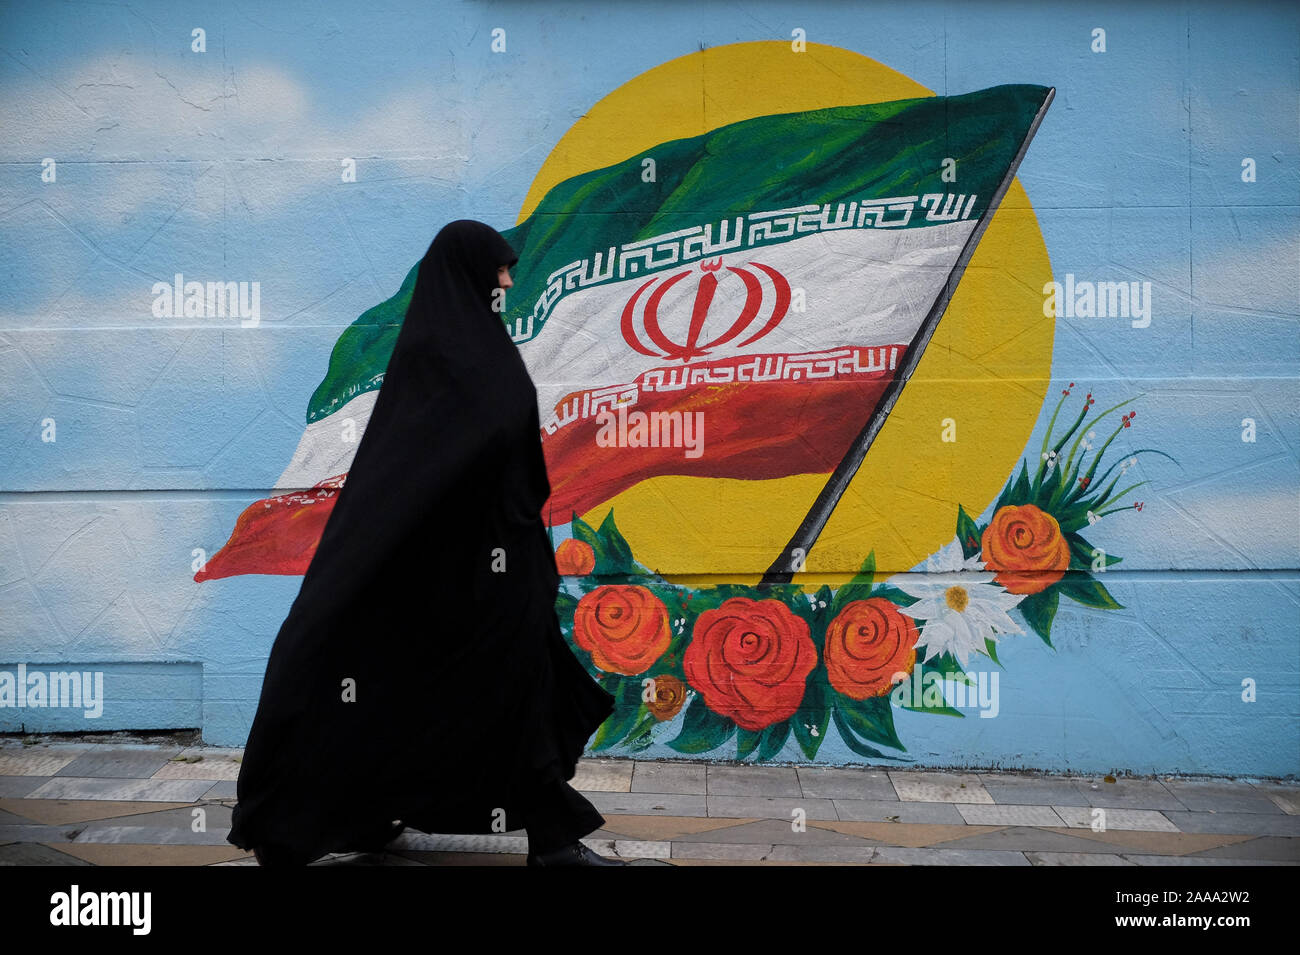 Tehran, Iran. 20th Nov, 2019. An Iranian veiled woman walks next to a wall painting of the Iranian national flag in Tehran, Iran. Iran on 15 November increased fuel prices by at least 50 percent prompting protests in different cities. President Hassan Rouhani said the country's people had defeated an ''enemy conspiracy'' behind a wave of violent street protests. Demonstrations erupted in sanctions-hit Iran last week after an announcement the price of petrol would be raised by as much as 200 percent, with motorists blocking major roads in Tehran before the unrest spread rapidly to at least 4 Stock Photo